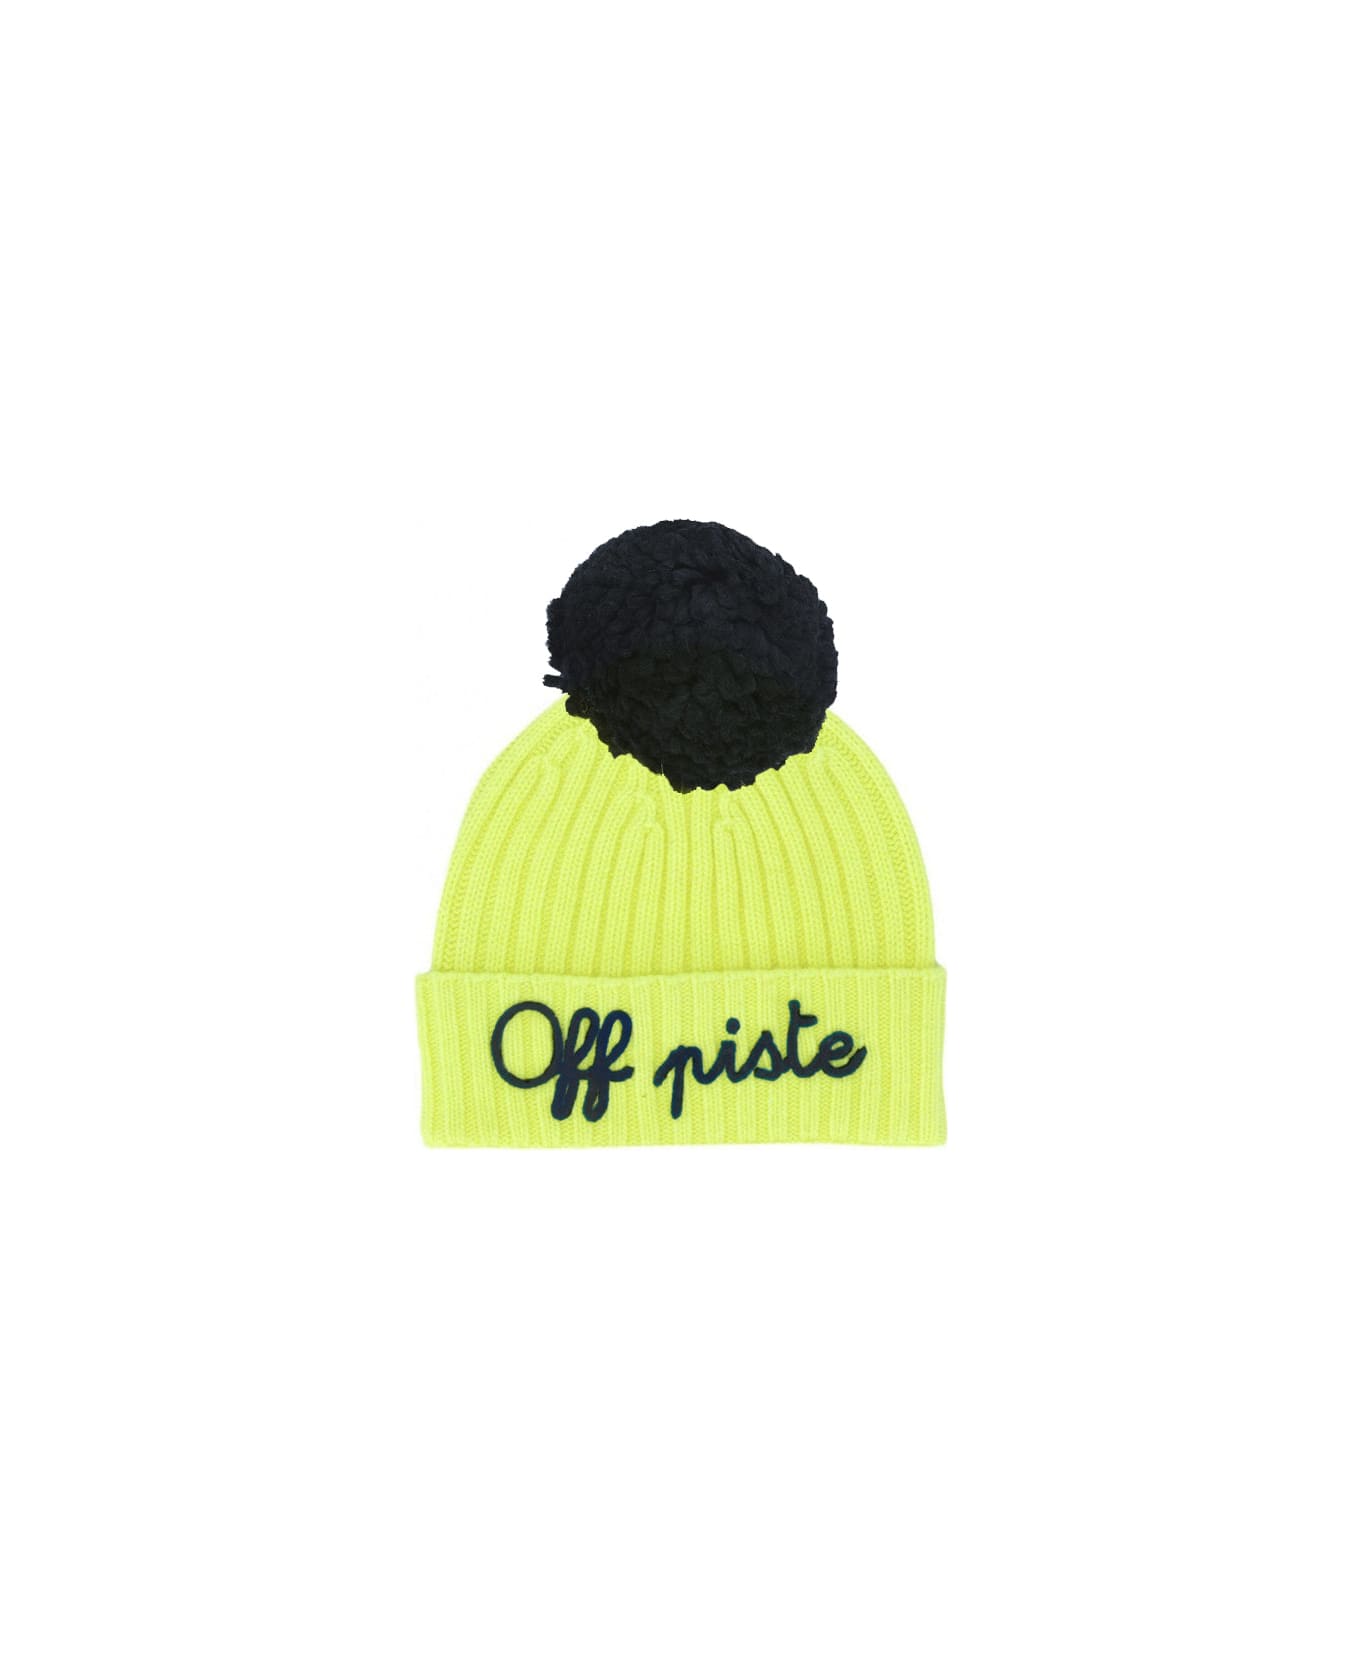 MC2 Saint Barth Kids Cashmere Blended Yellow Fluo Hat Off Piste Embroidery - YELLOW